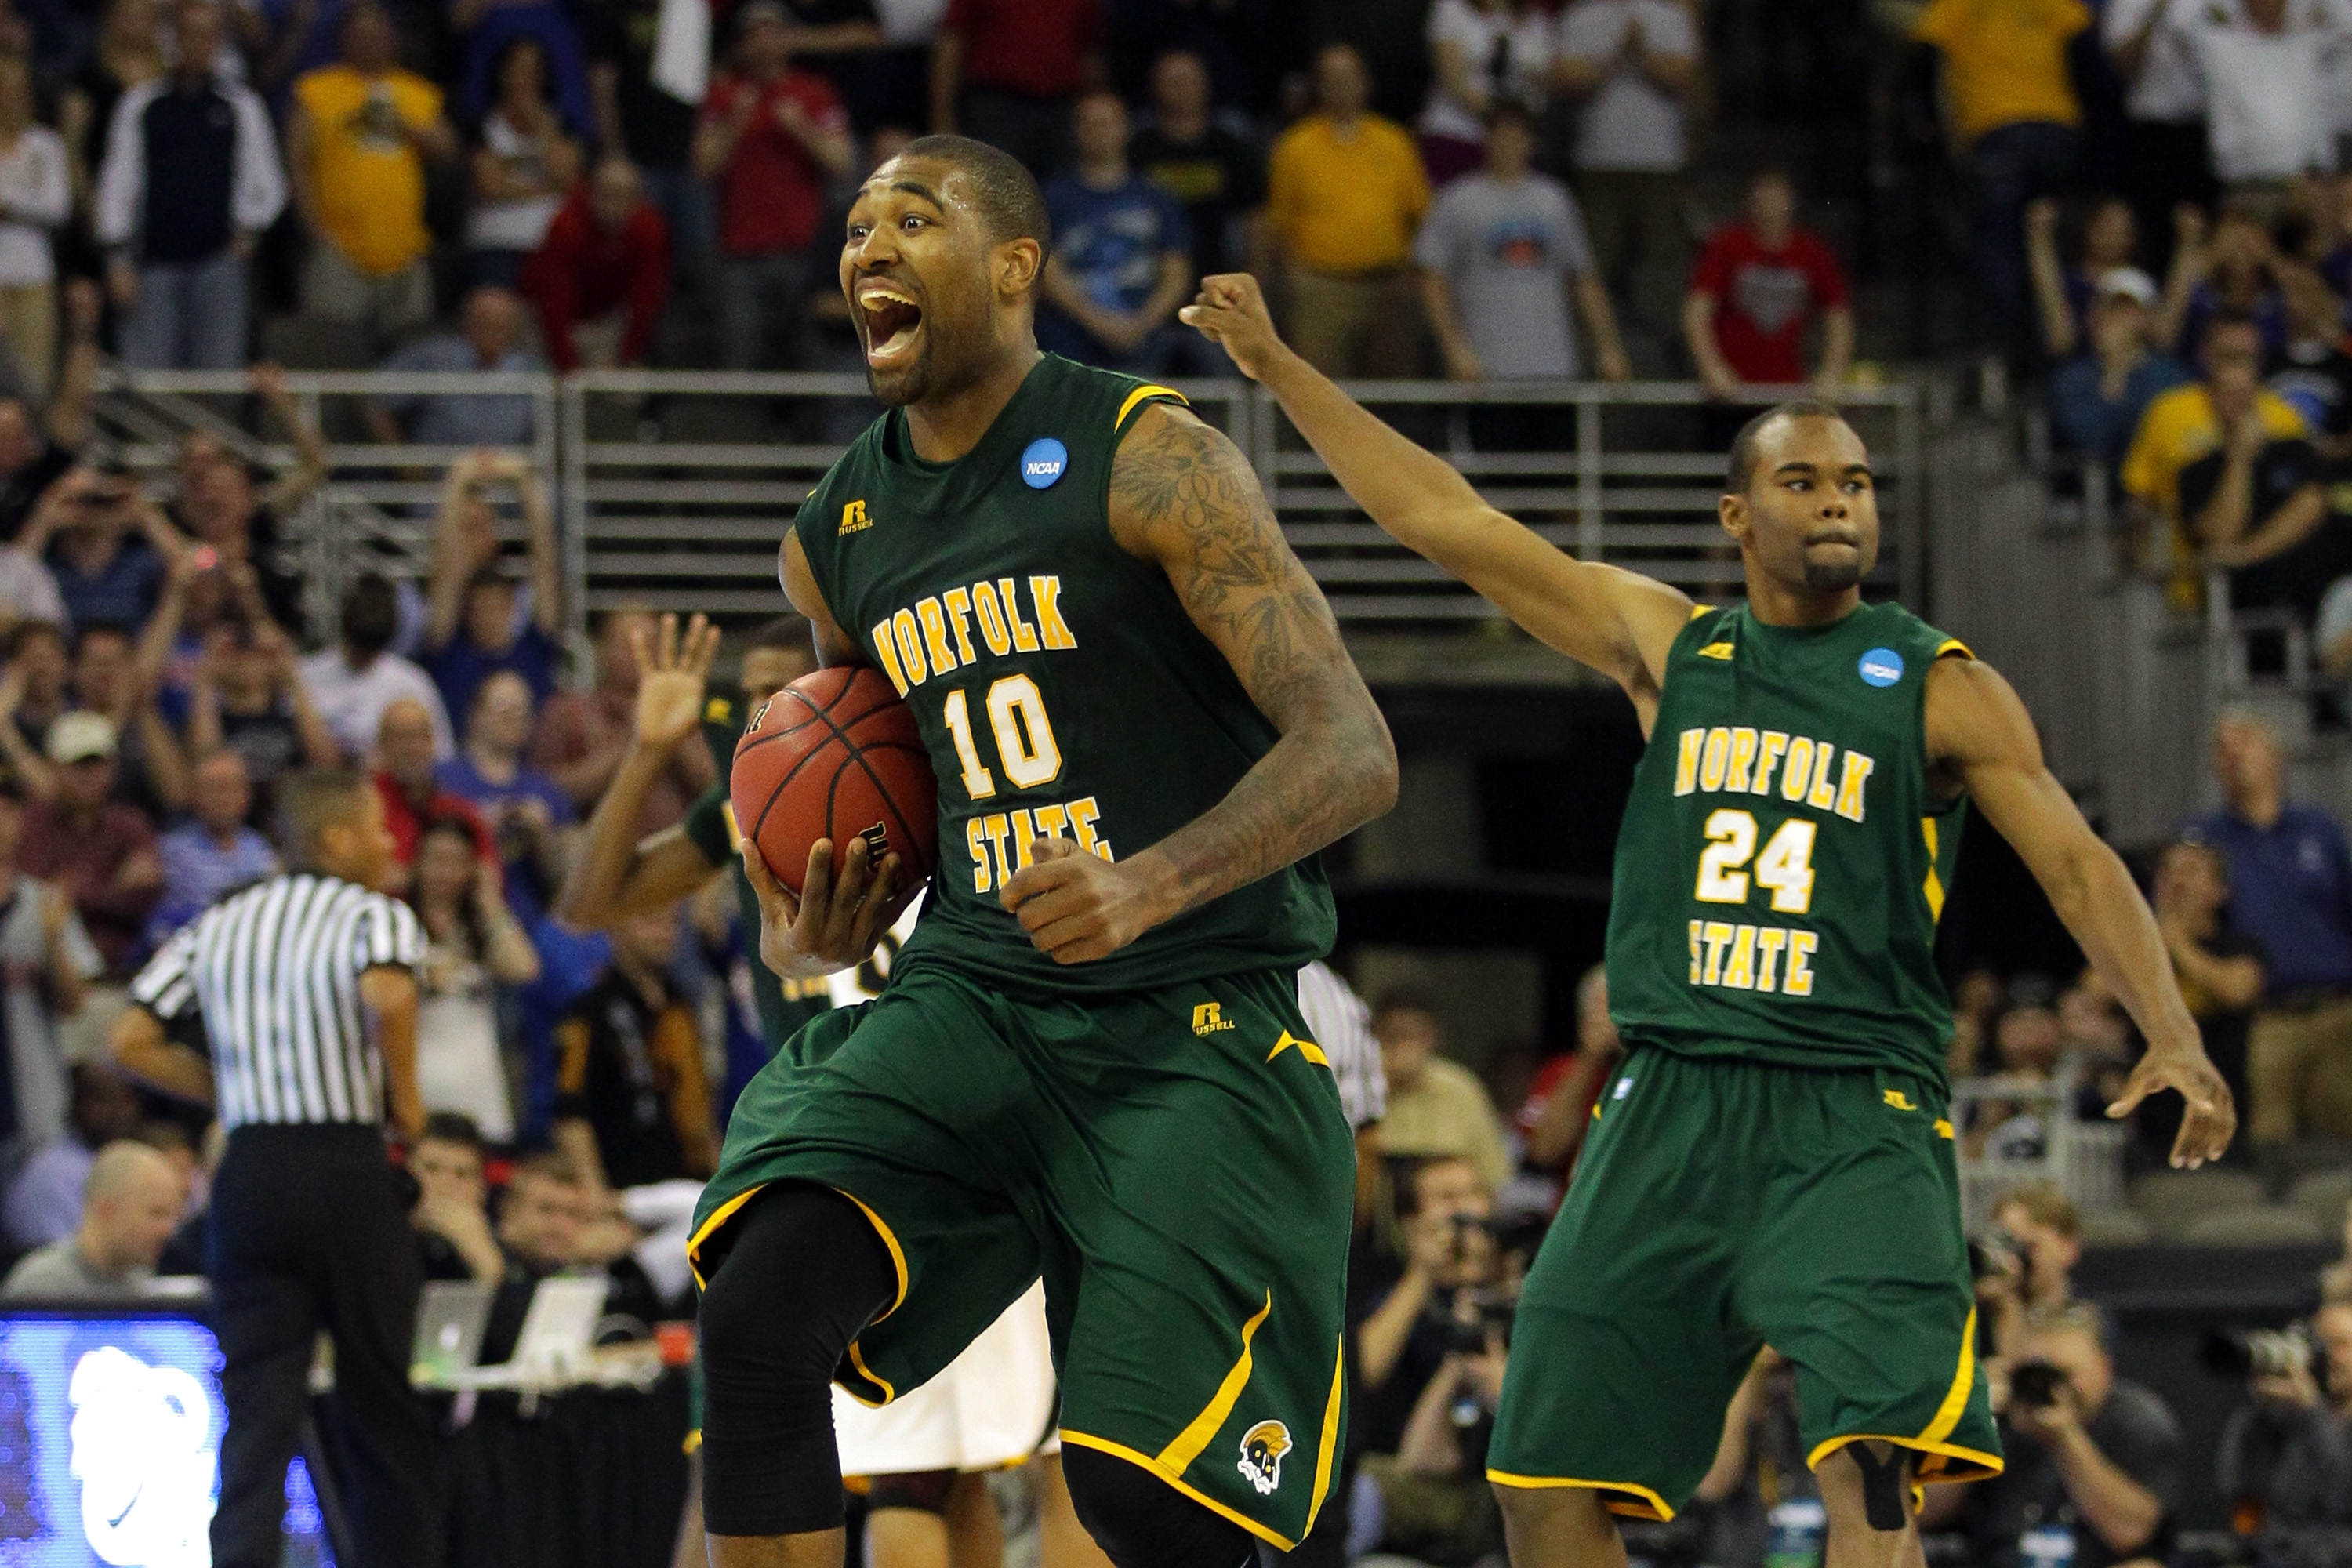 OMAHA, NE - MARCH 16: Kyle O'Quinn #10 and Brandon Wheeless #24 of the Norfolk State Spartans celebrate after they won 86-84 against the Missouri Tigers during the second round of the 2012 NCAA Men's Basketball Tournament at CenturyLink Center on March 16, 2012 in Omaha, Nebraska. (Photo by Doug Pensinger/Getty Images)